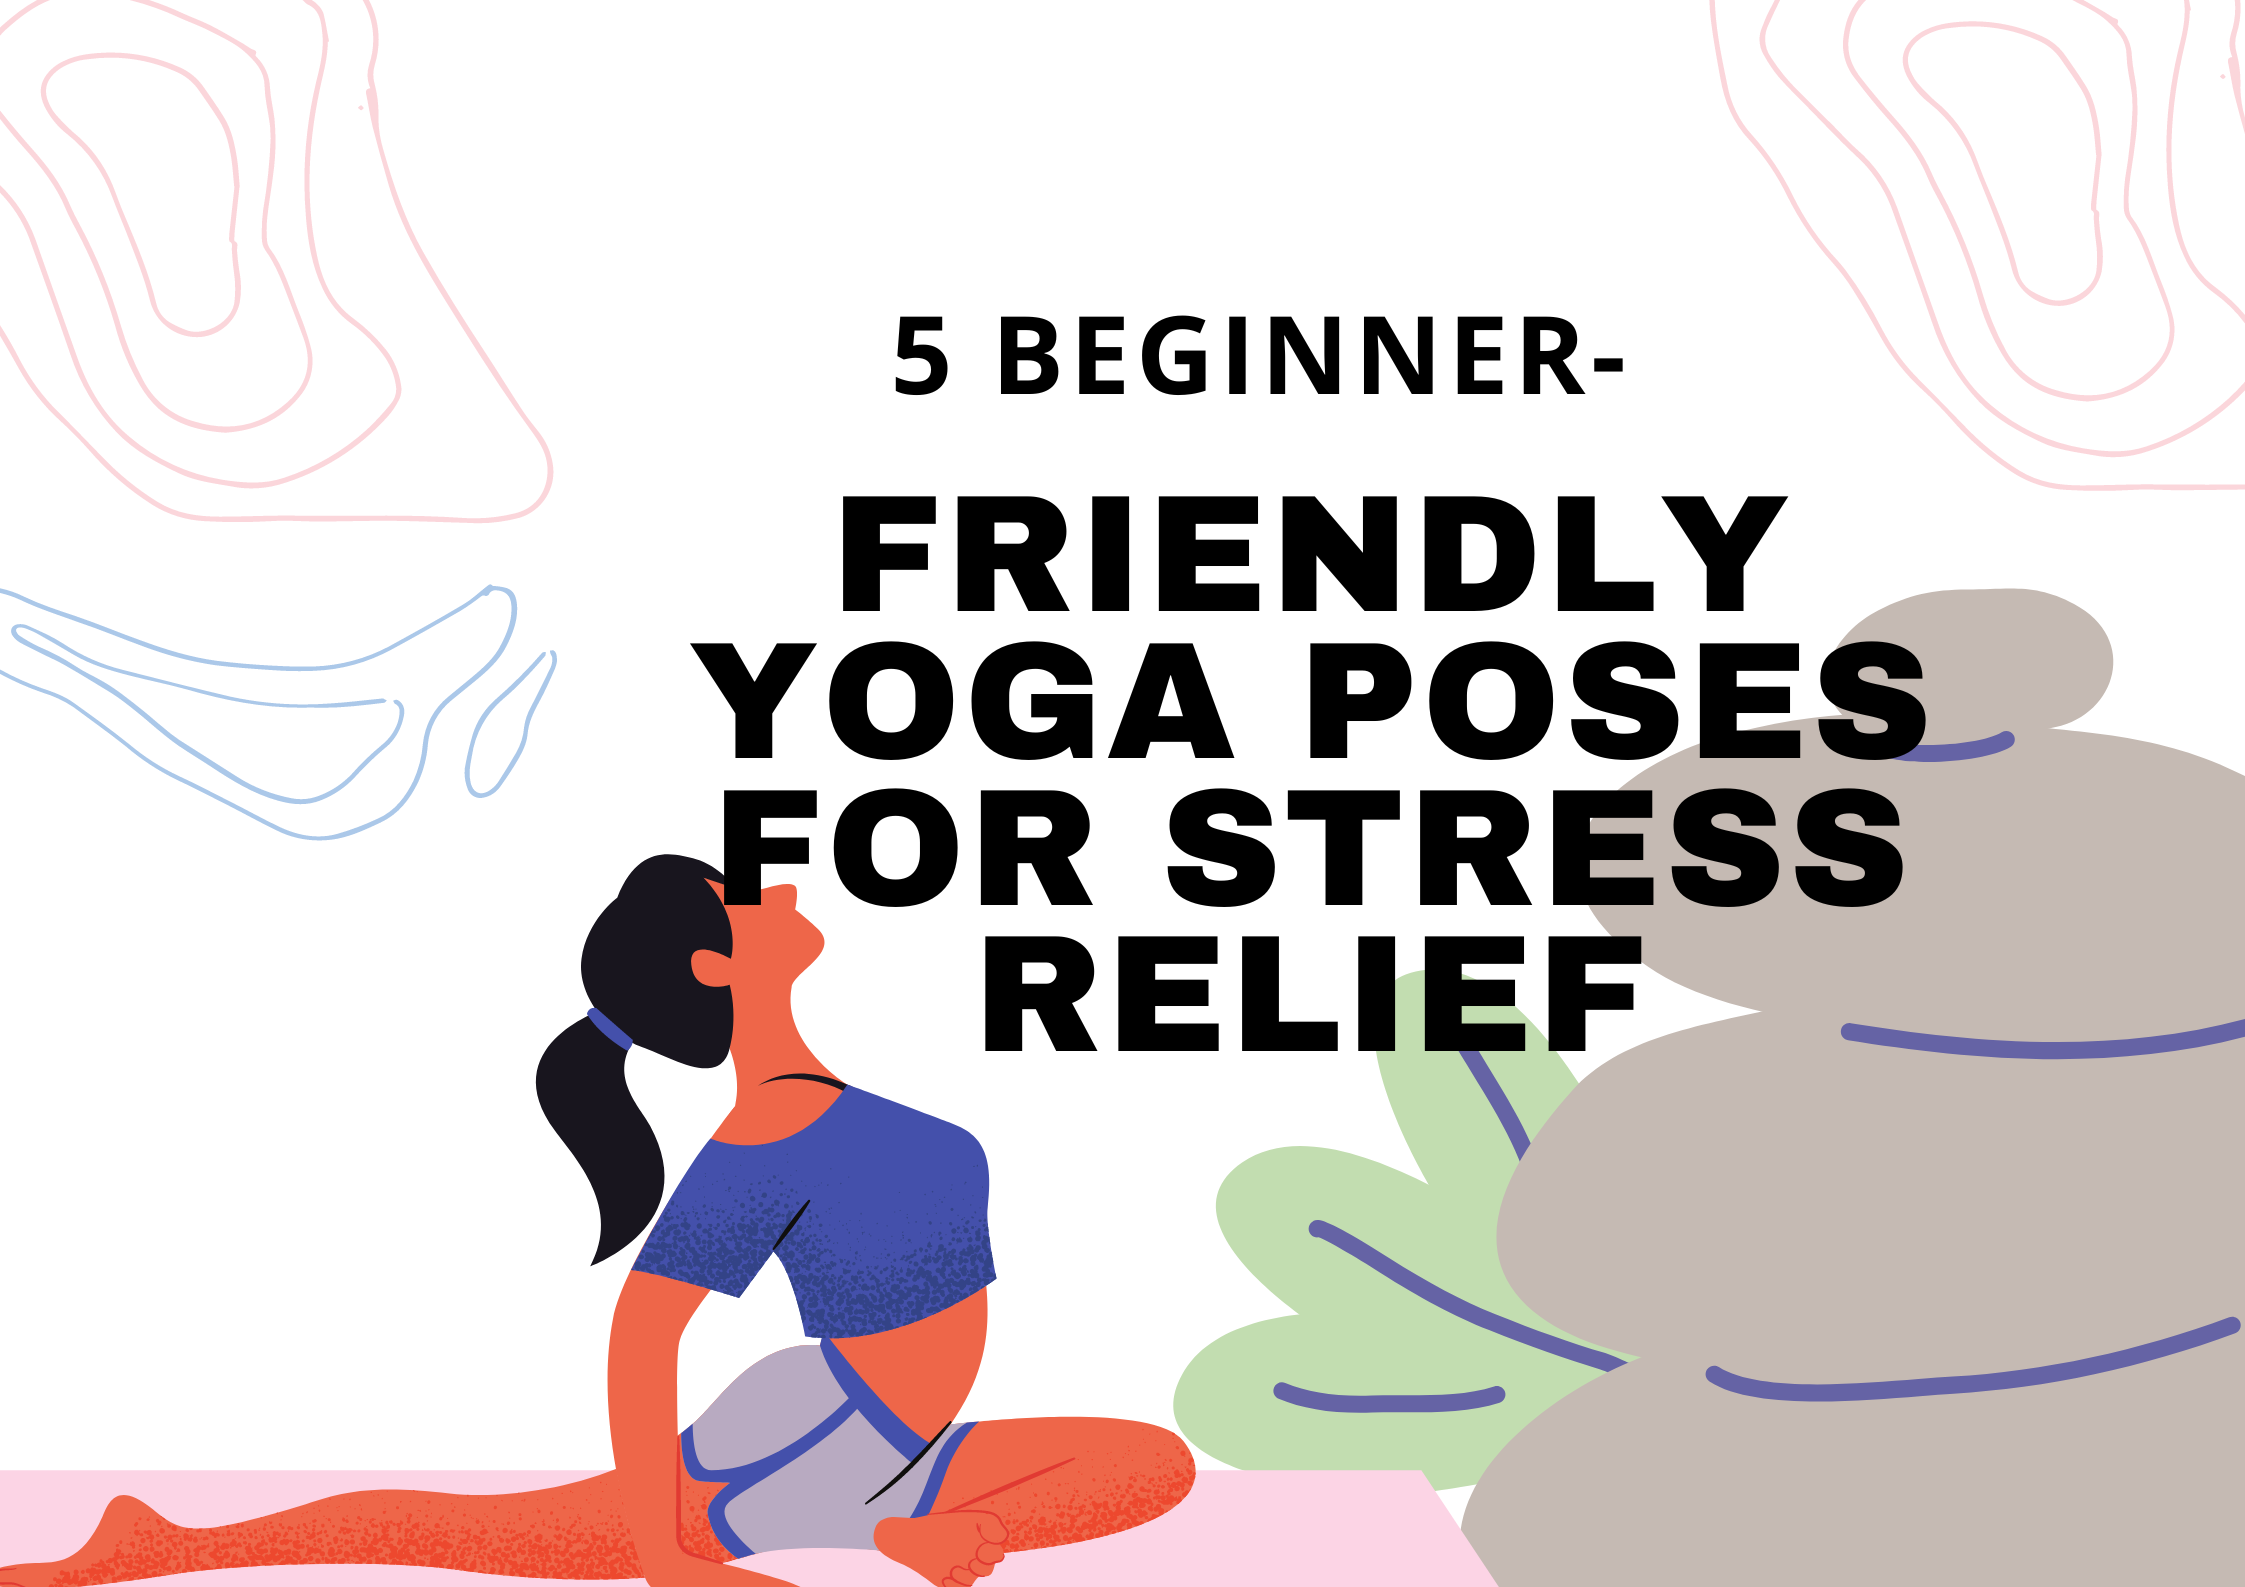 5 Beginner-Friendly Yoga Poses for Stress Relief